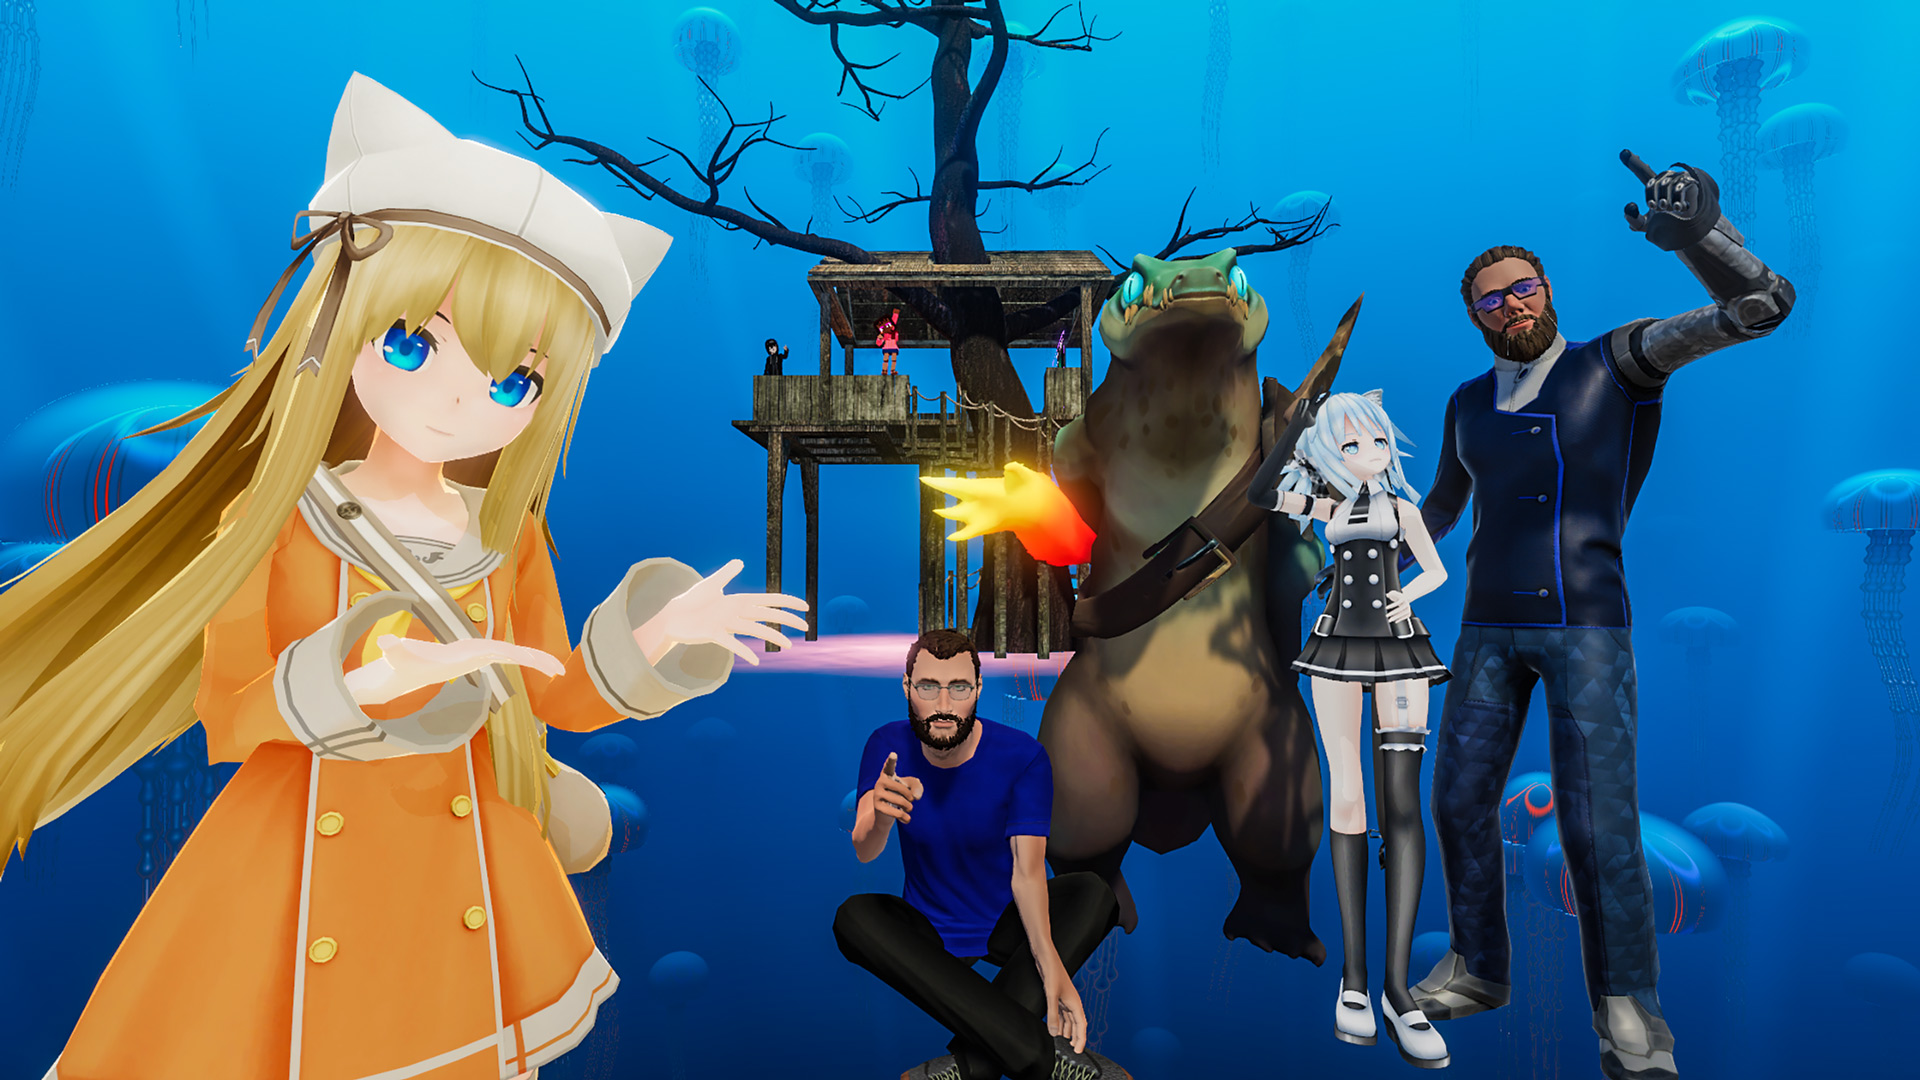 Social Vr App Vrchat Is Seeing Record Usage Amidst The Pandemic